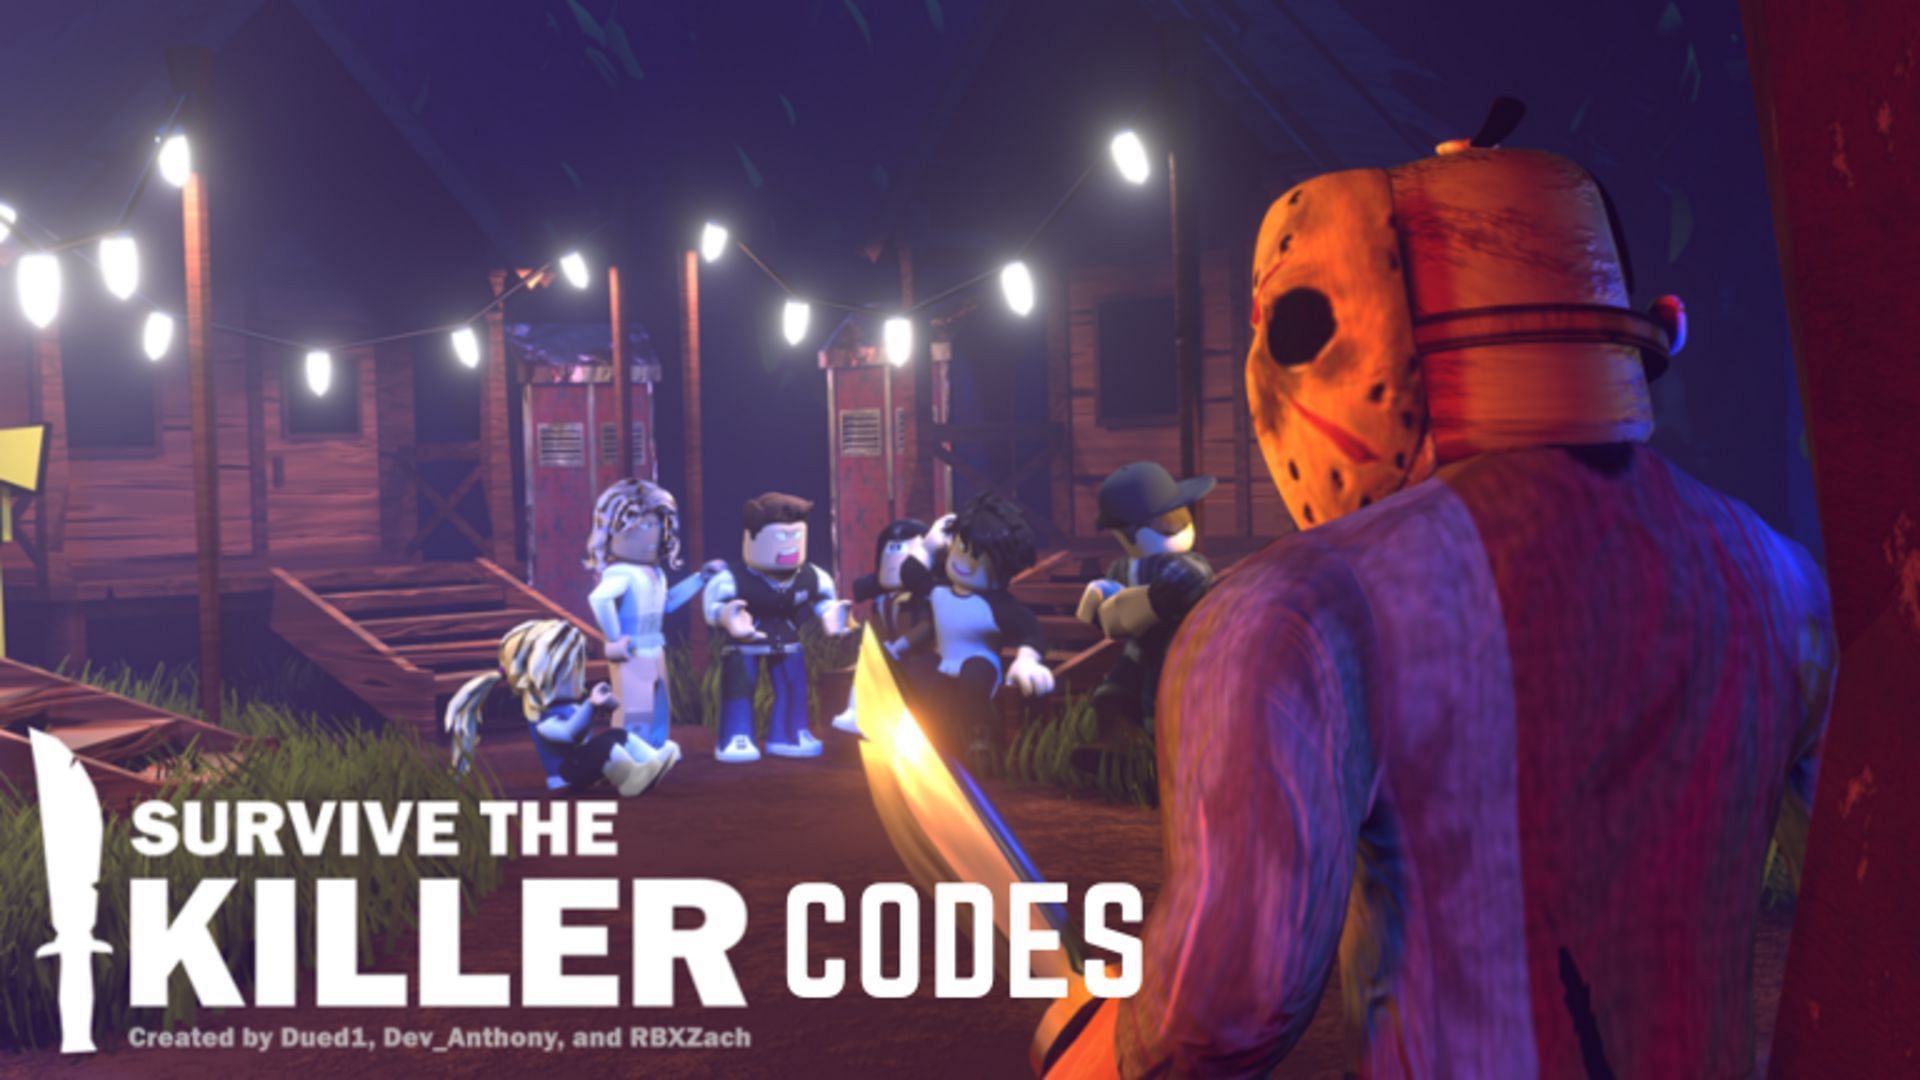 Free Roblox codes (October 2022); all free available promo codes